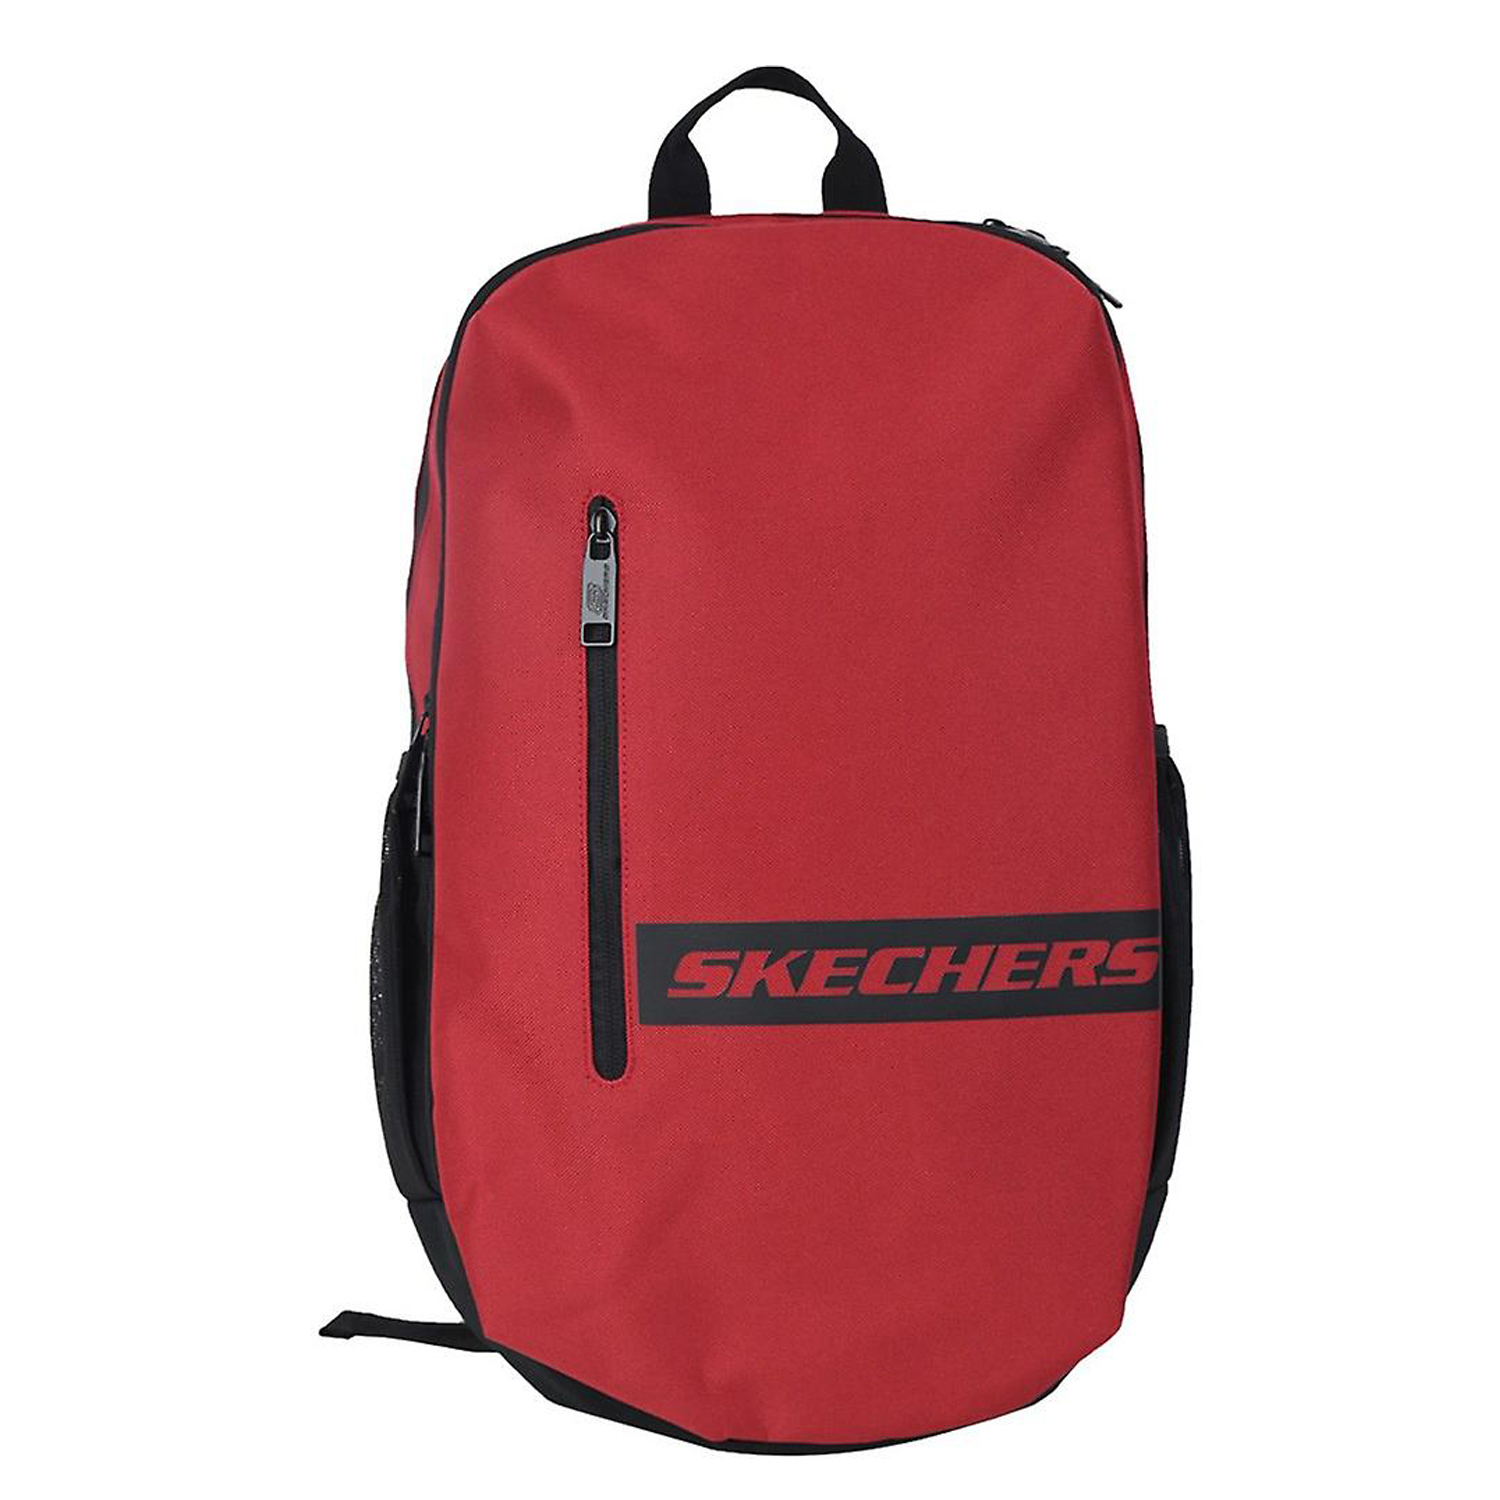 Foto de producto: Athletic backpack